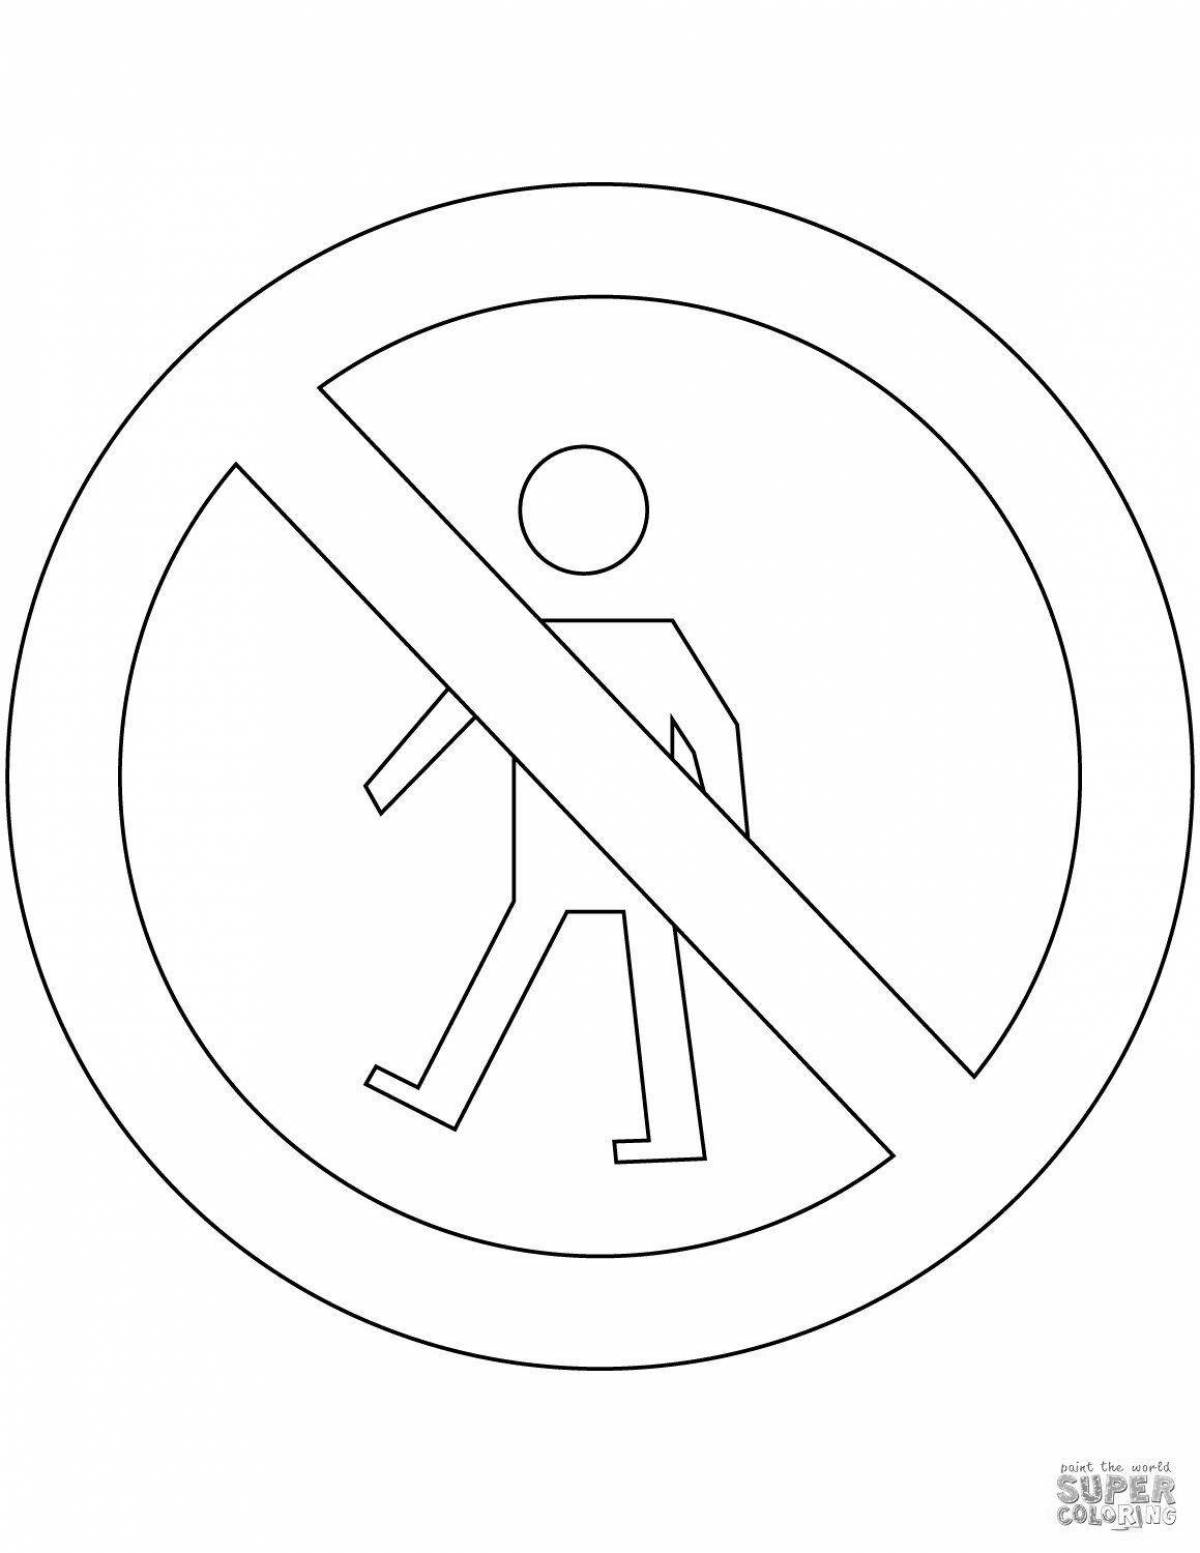 Adorable safety sign coloring page